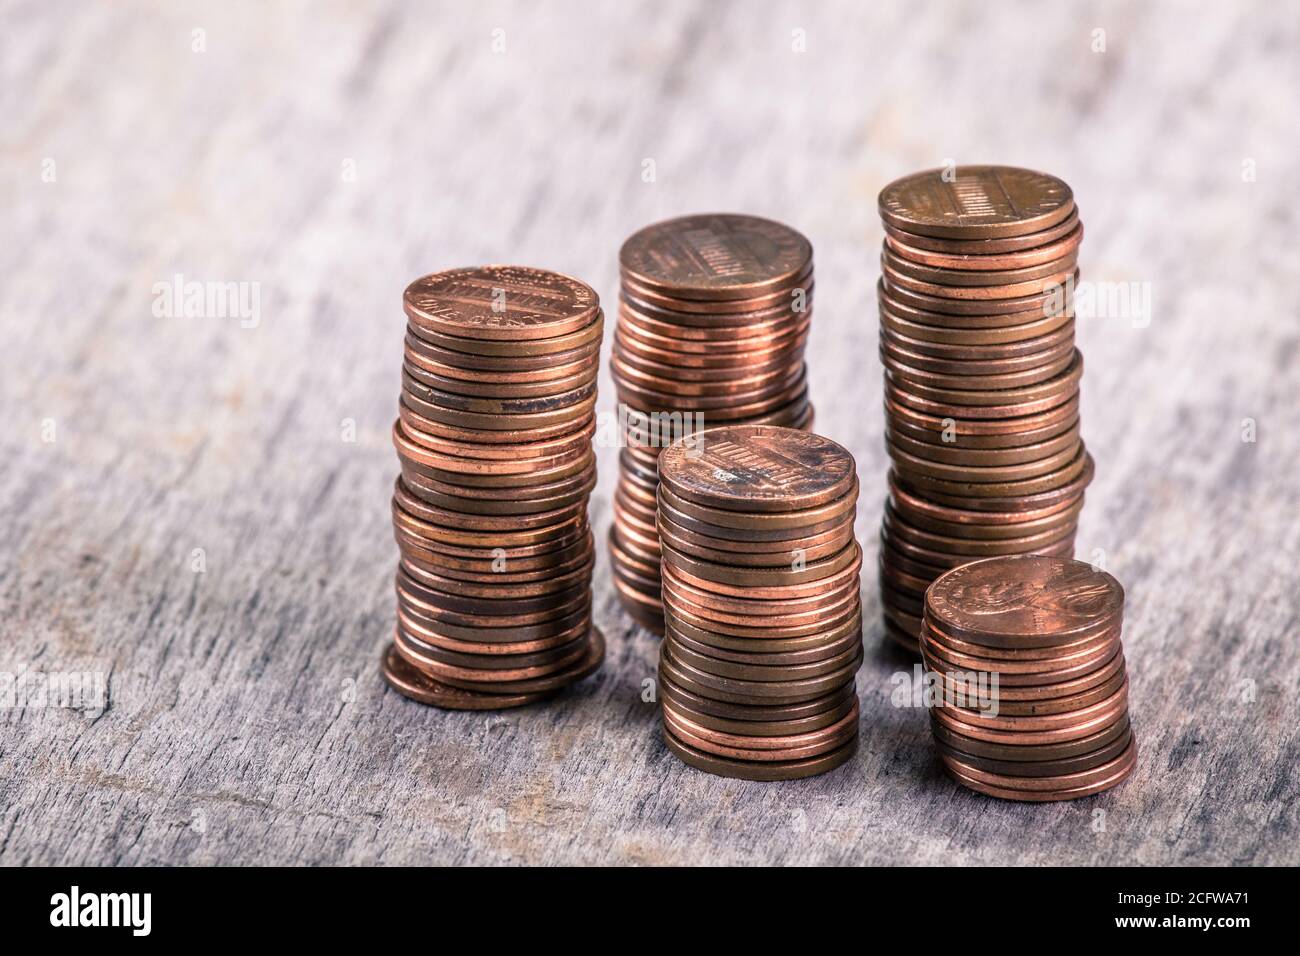 Stacks of old pennies on a wooden table Stock Photo